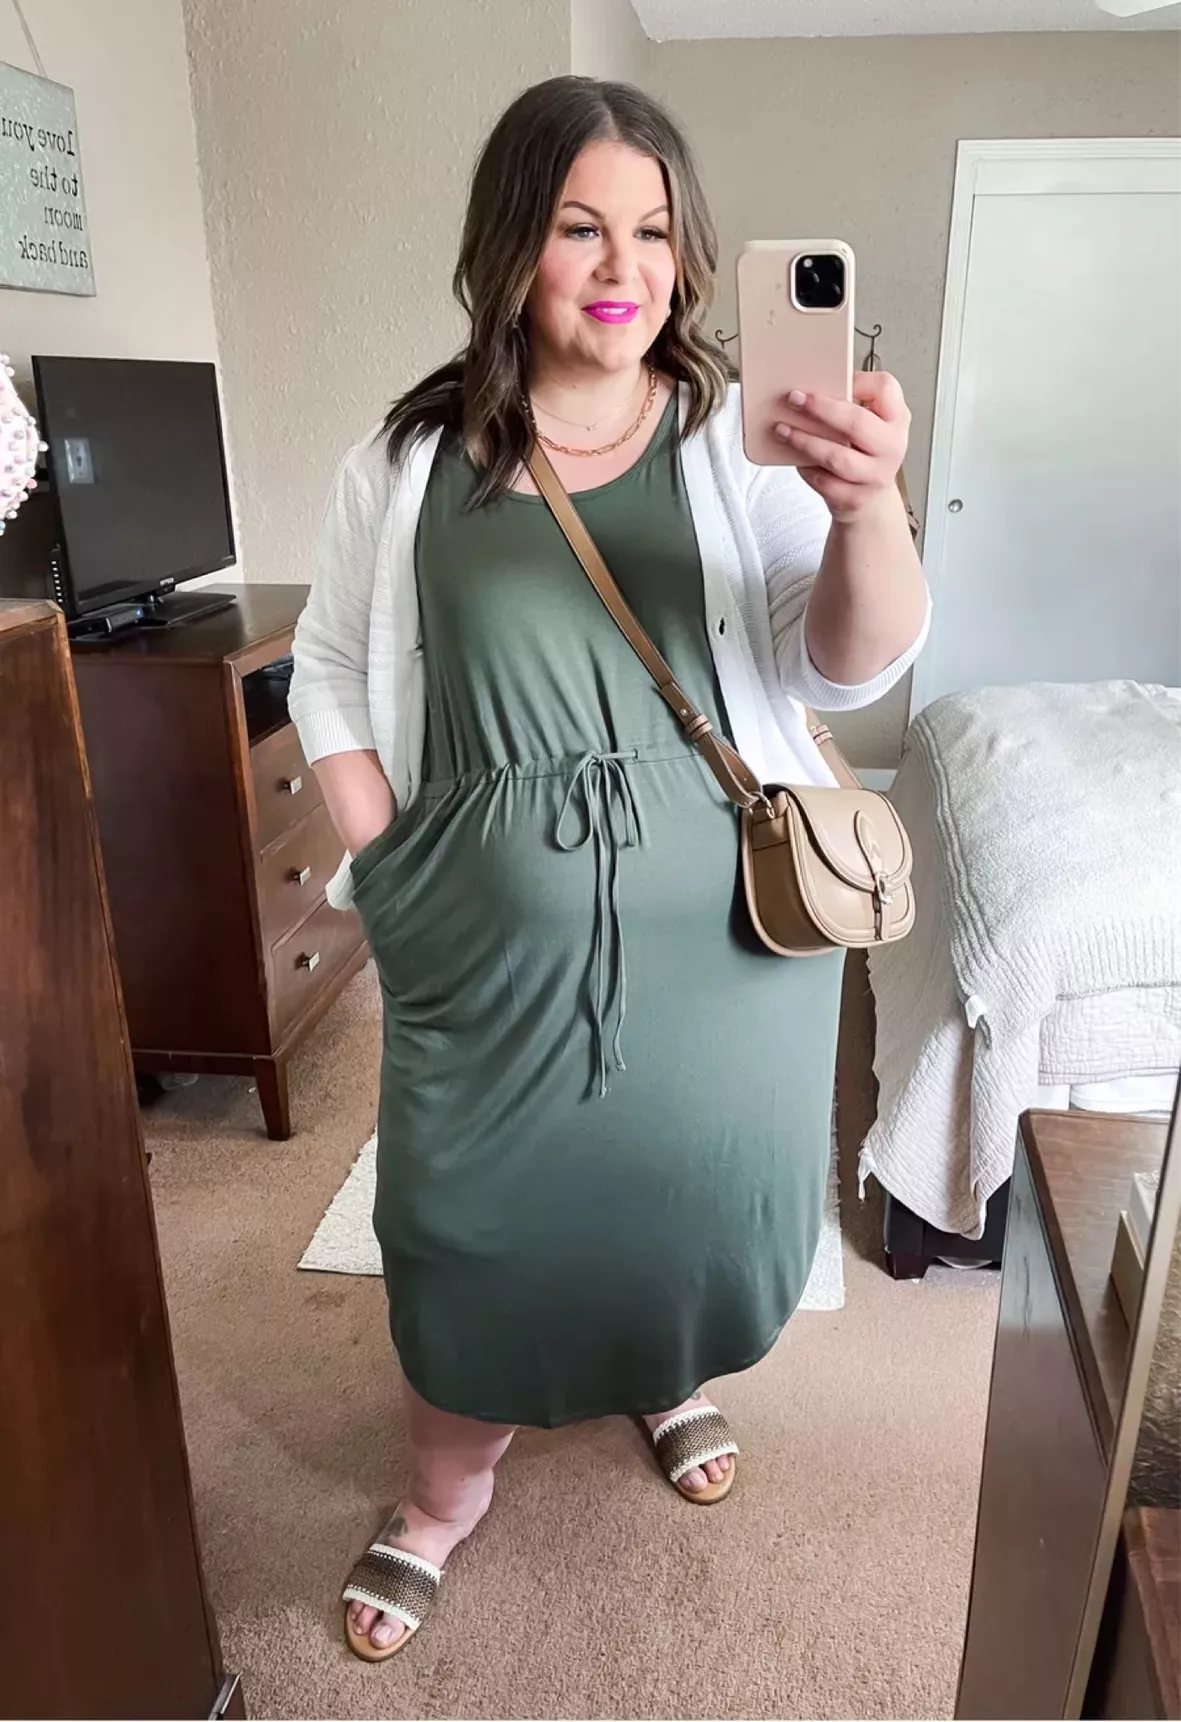 Comfy outfits can be cute 💫 : r/PlusSizeFashion